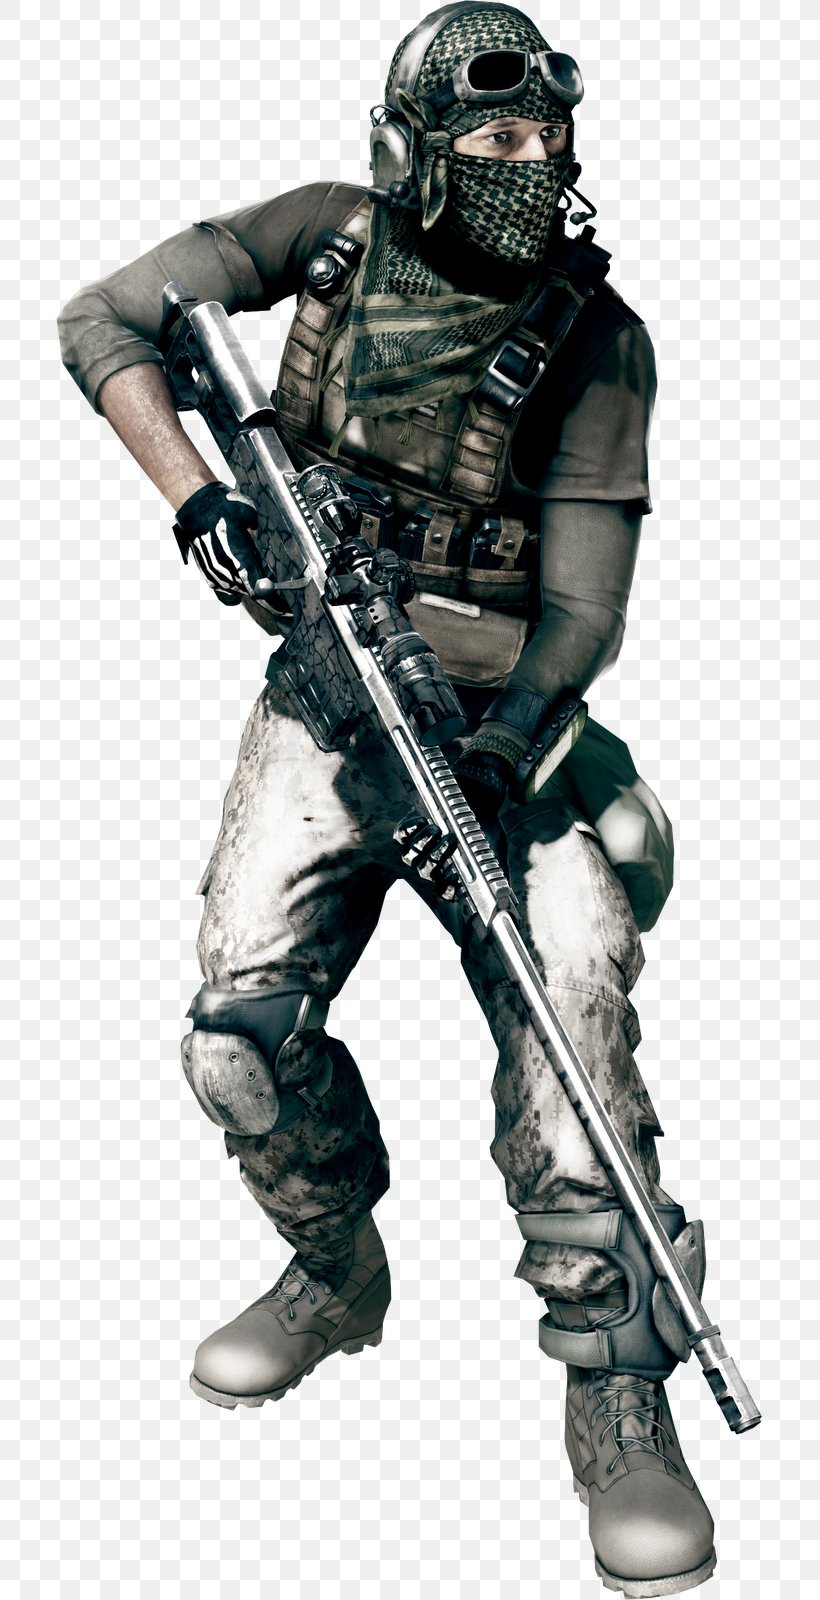 Battlefield 3 Battlefield 4 Battlefield 1 Battlefield Heroes Battlefield 2, PNG, 756x1600px, Battlefield 3, Action Figure, Action Game, Armour, Battlefield Download Free